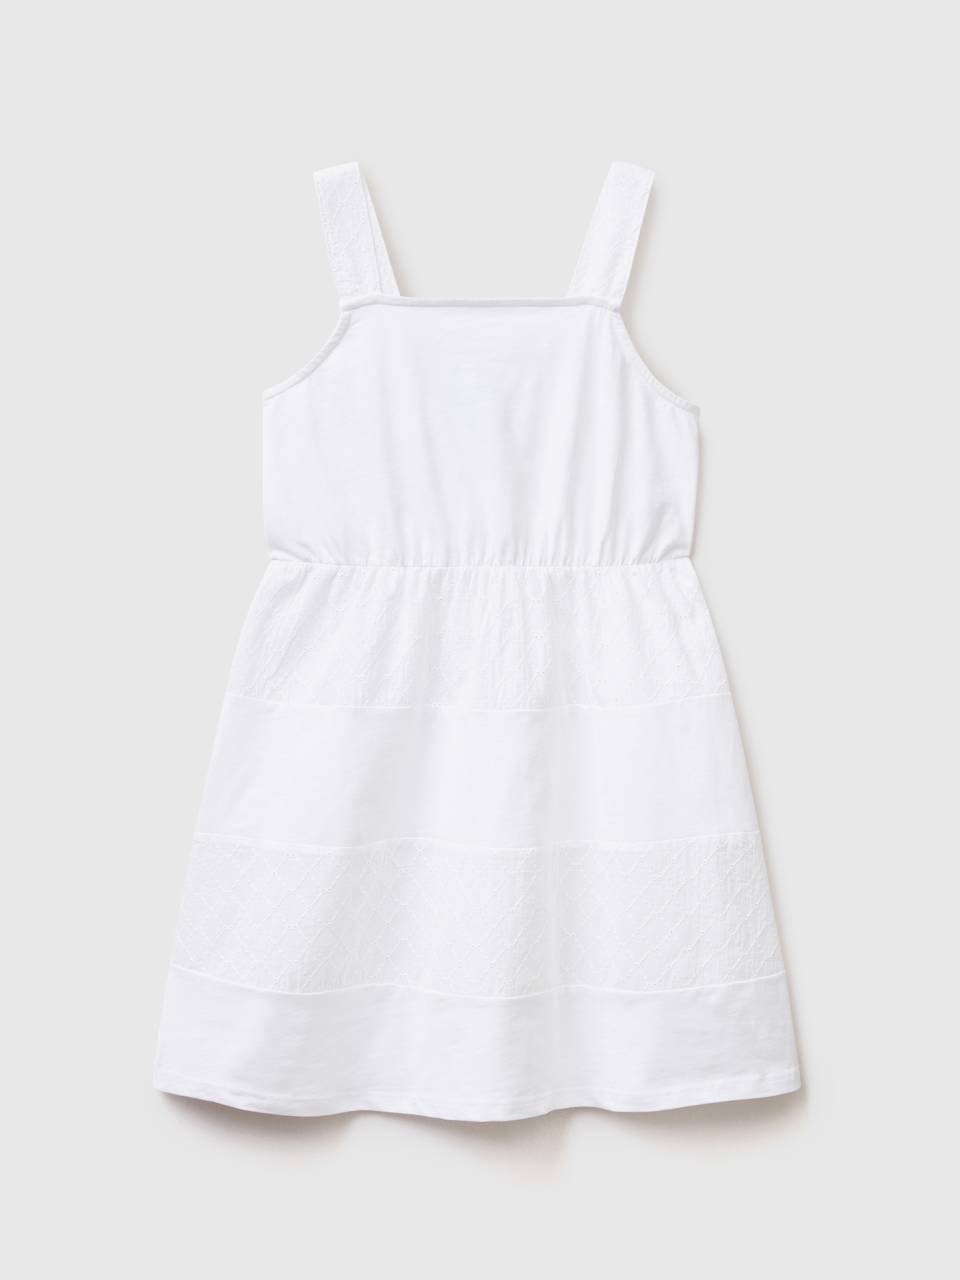 Benetton dress with broderie anglaise details. 1